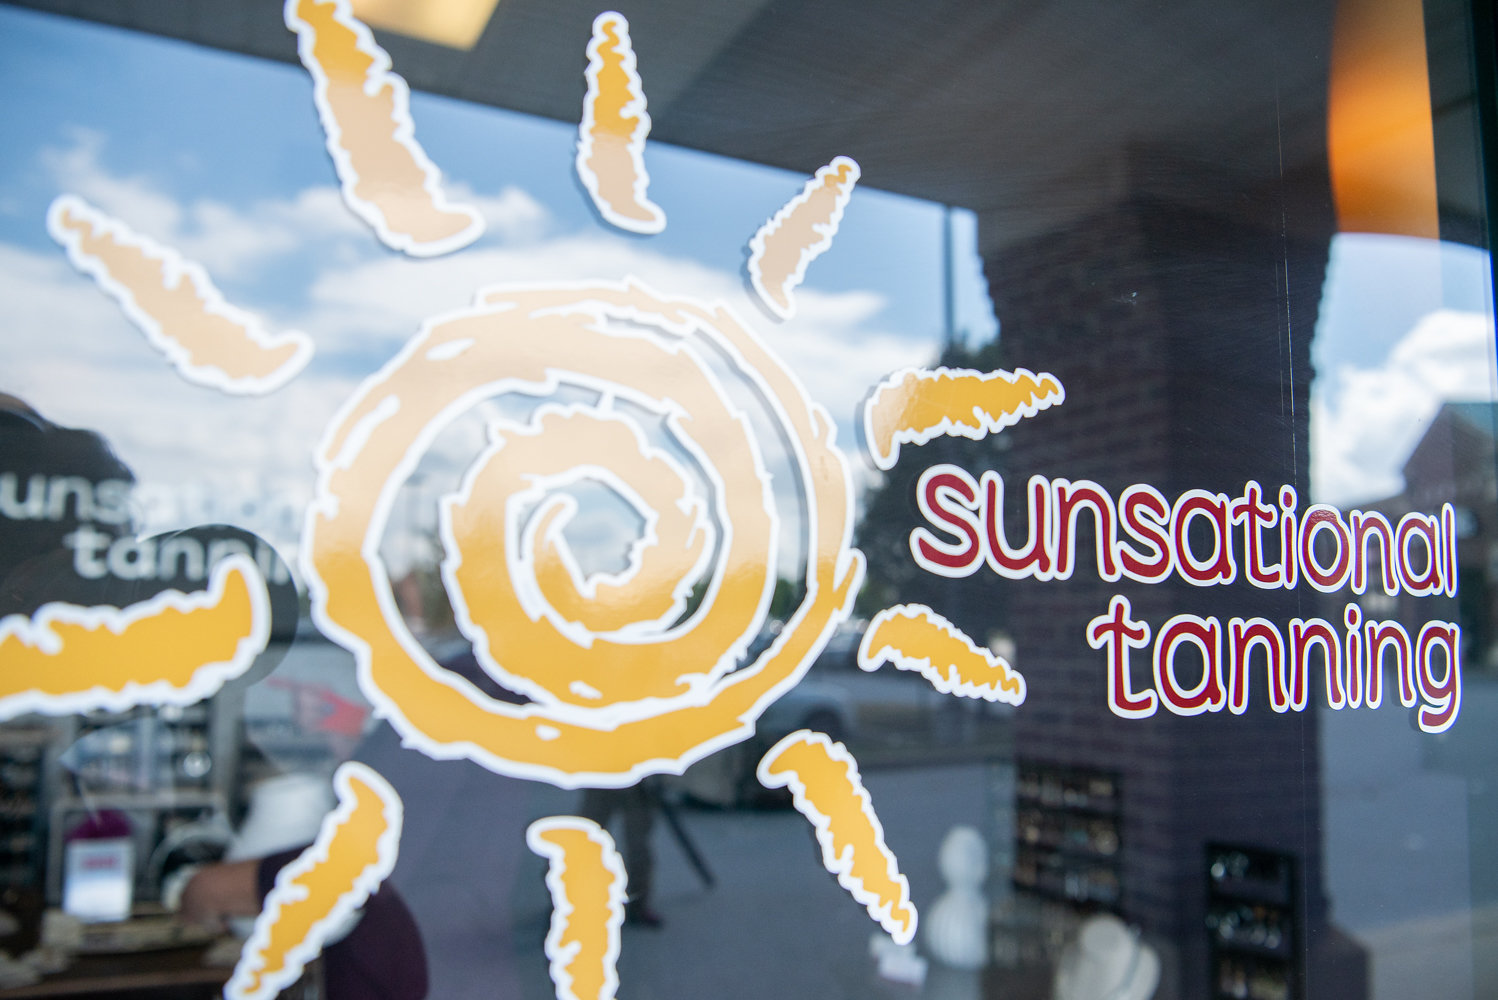 Sunsational Tanning, Inc - Perryville 5301 Pulaski Hwy, Perryville Maryland 21903